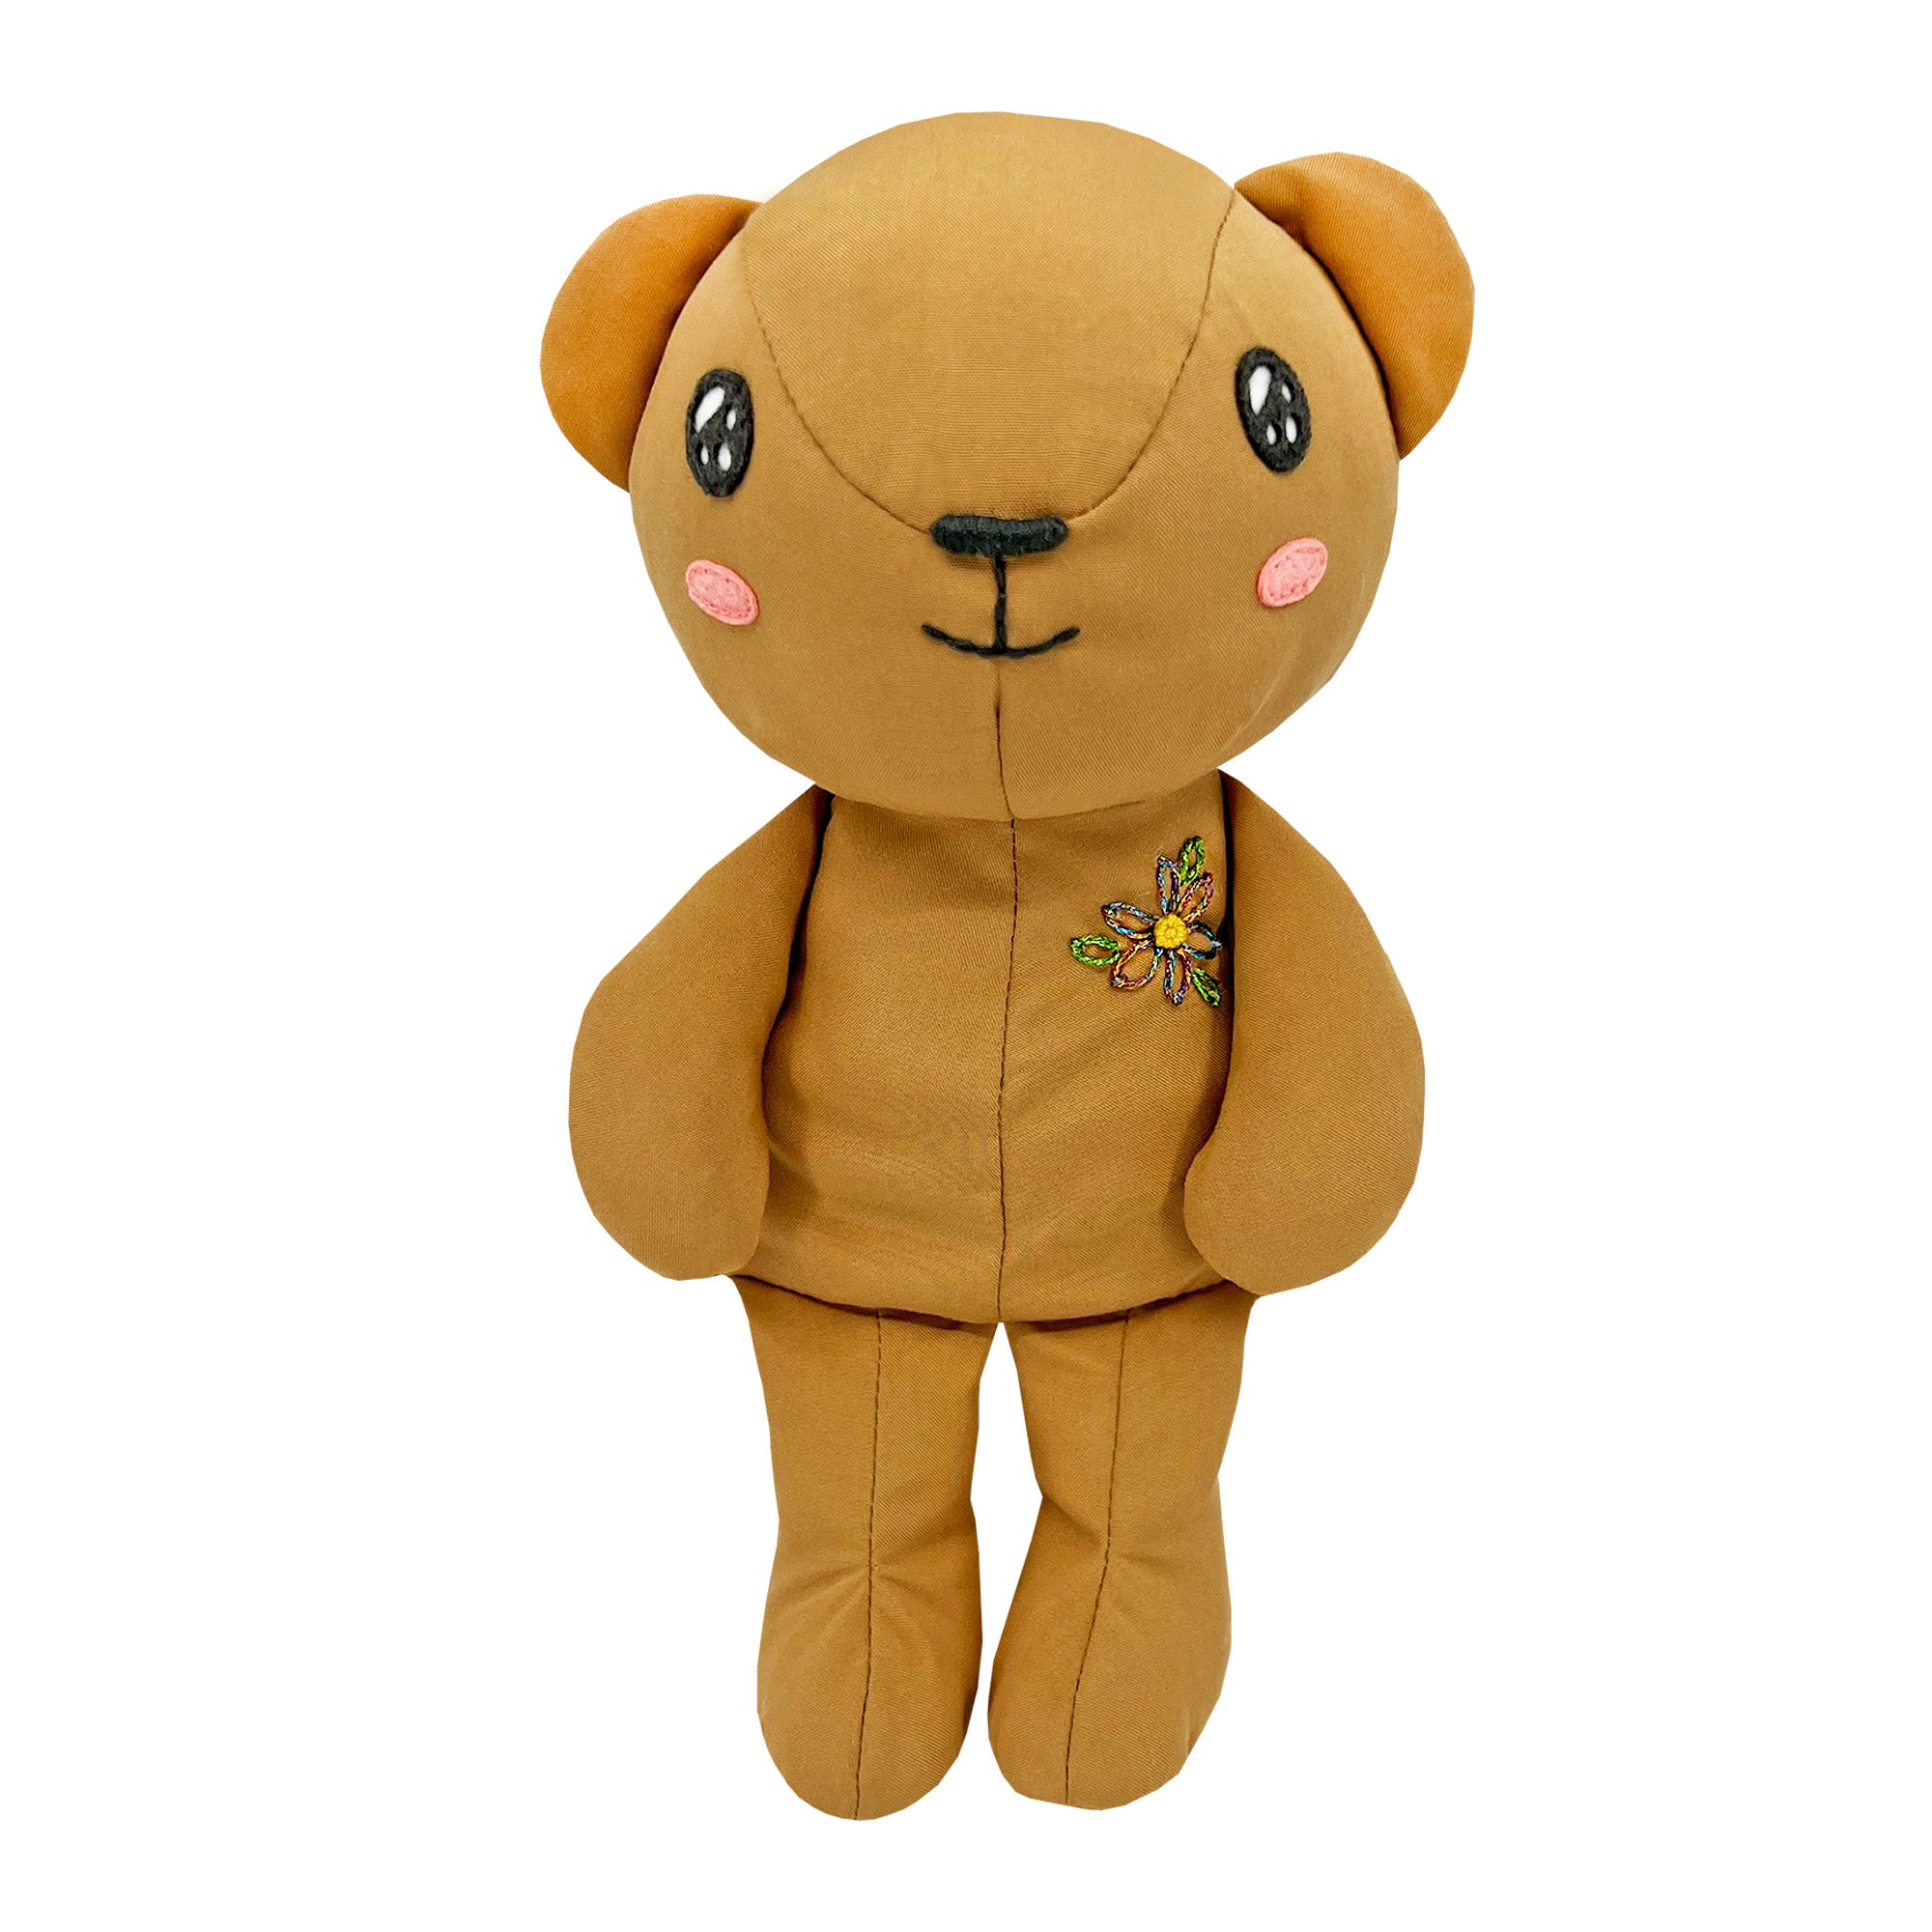 Bamboo Fabric Stuffed Bear-sustainable gifts for kids-eco friendly plush-eco friendly gifts for kids